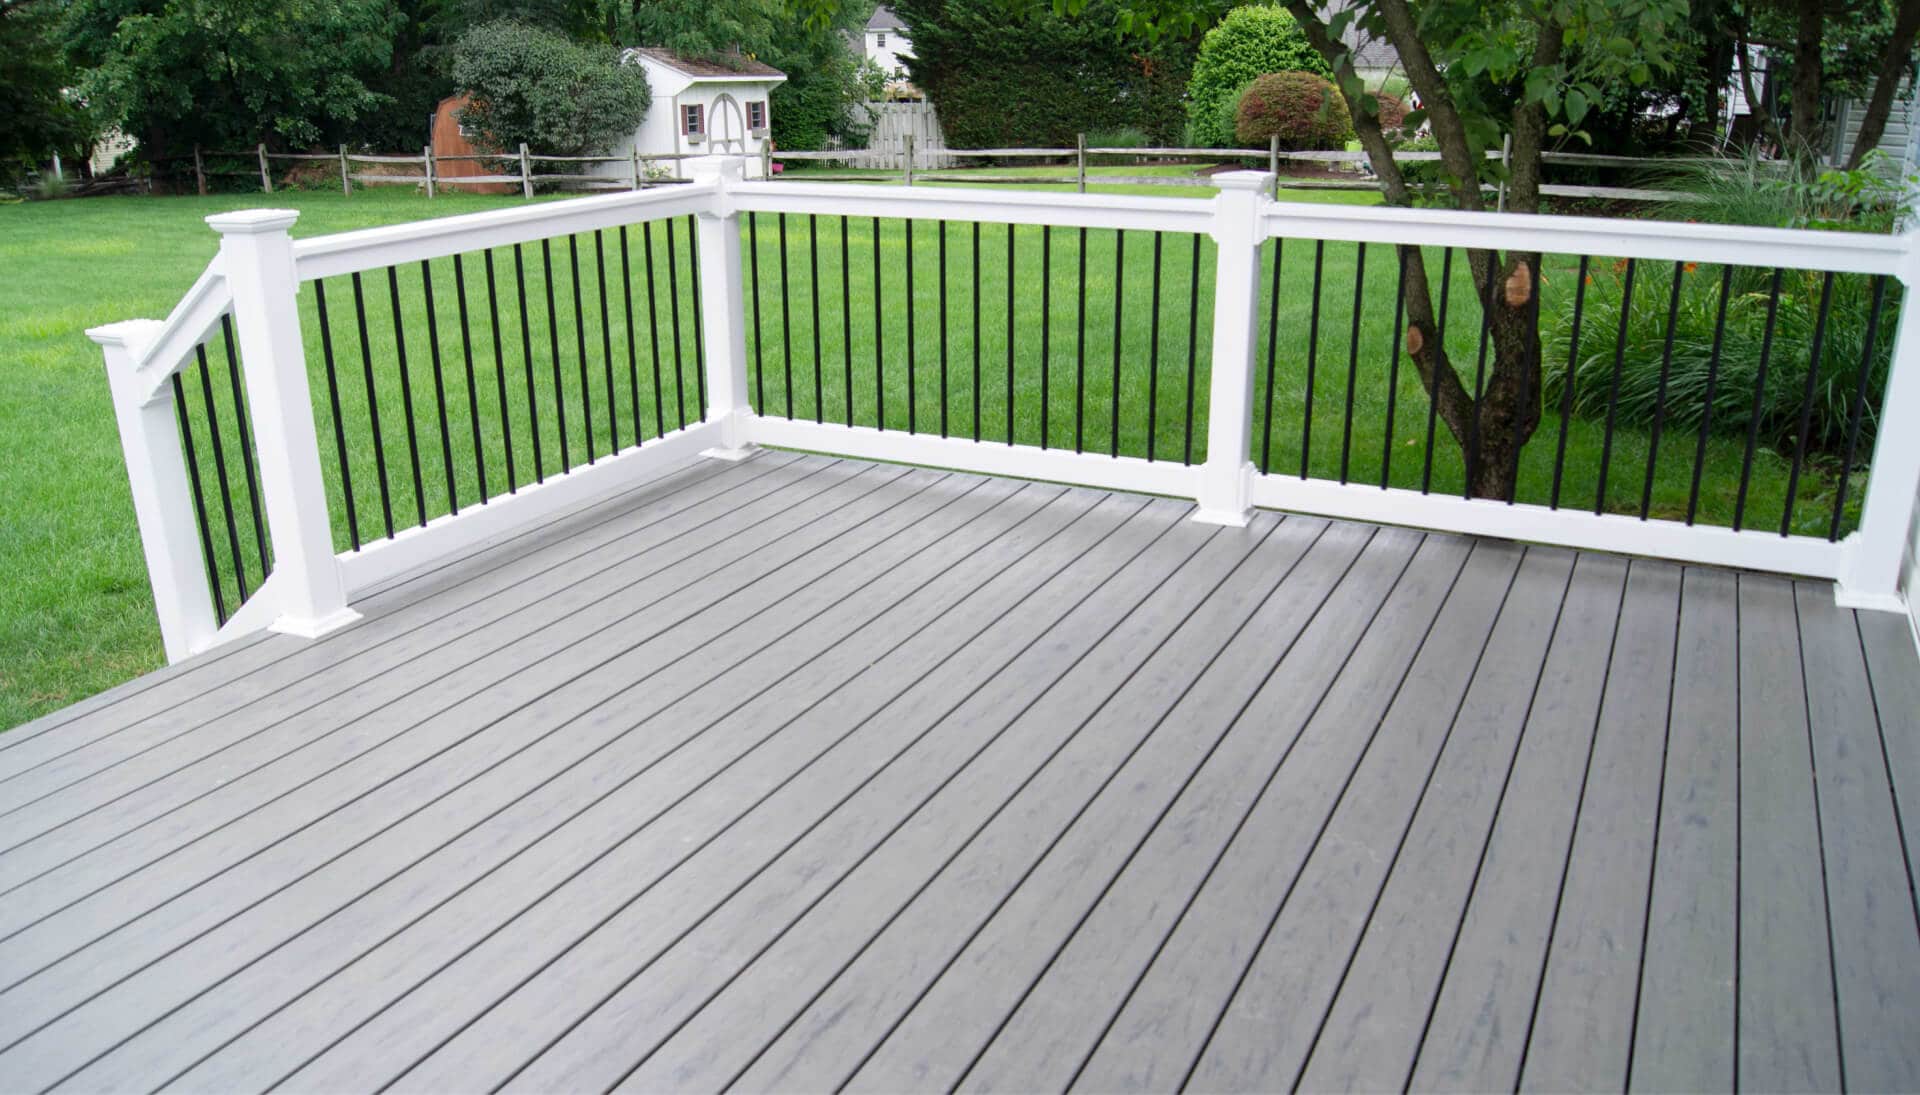 Deck Builders in Scottsdale, AZ: Enhance Your Deck's Aesthetic with Our Railing and Covers